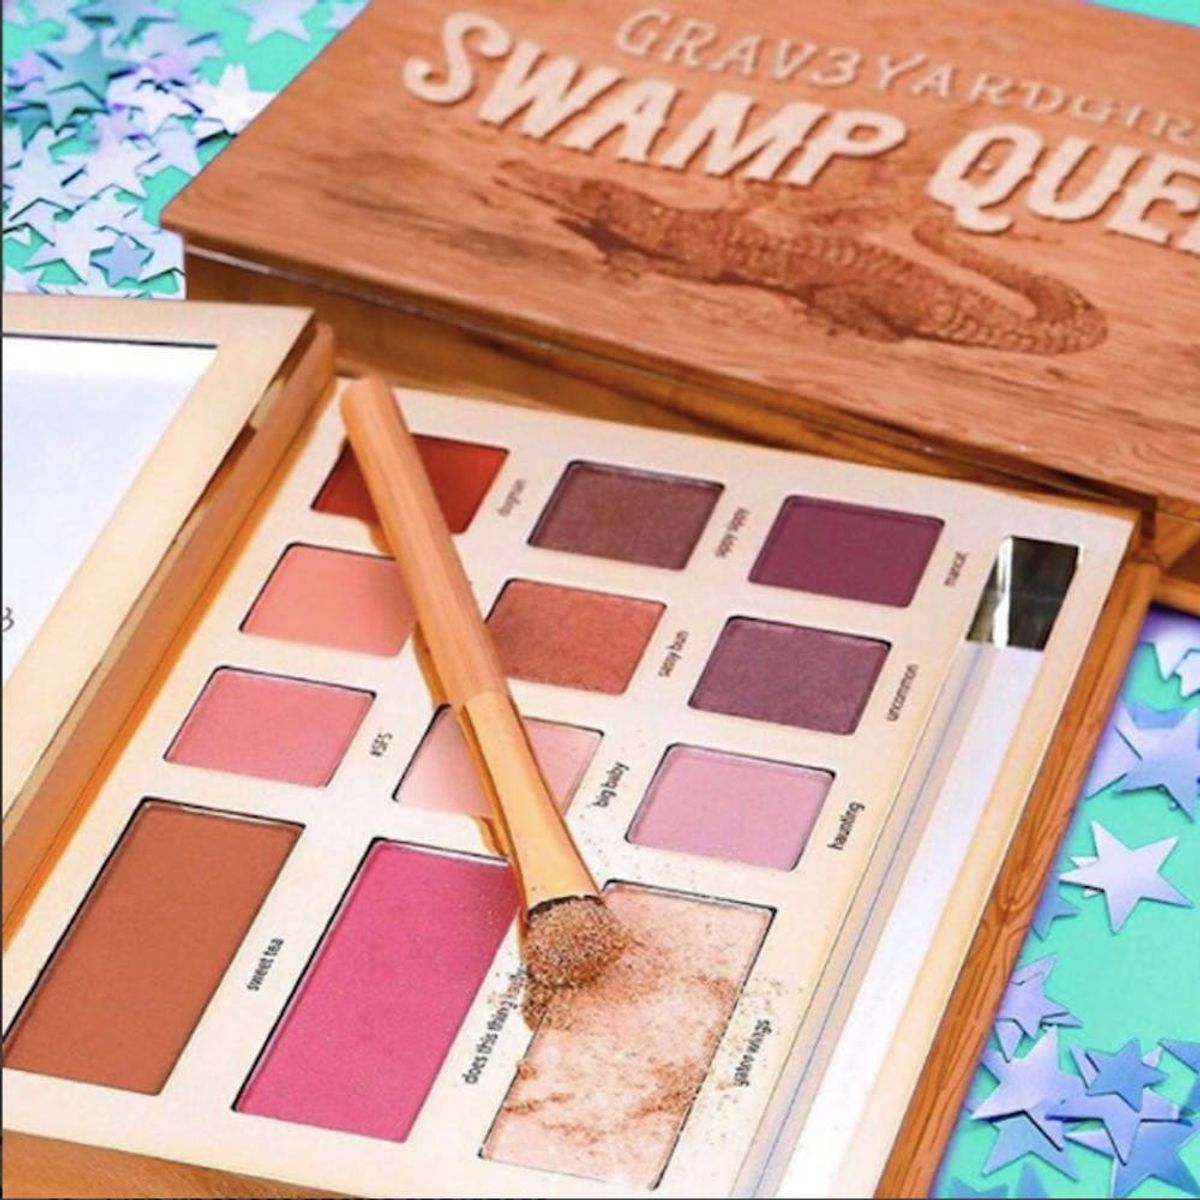 Tarte Cosmetics and Ulta Want YOU to Help Name Their Newest Palette Collab